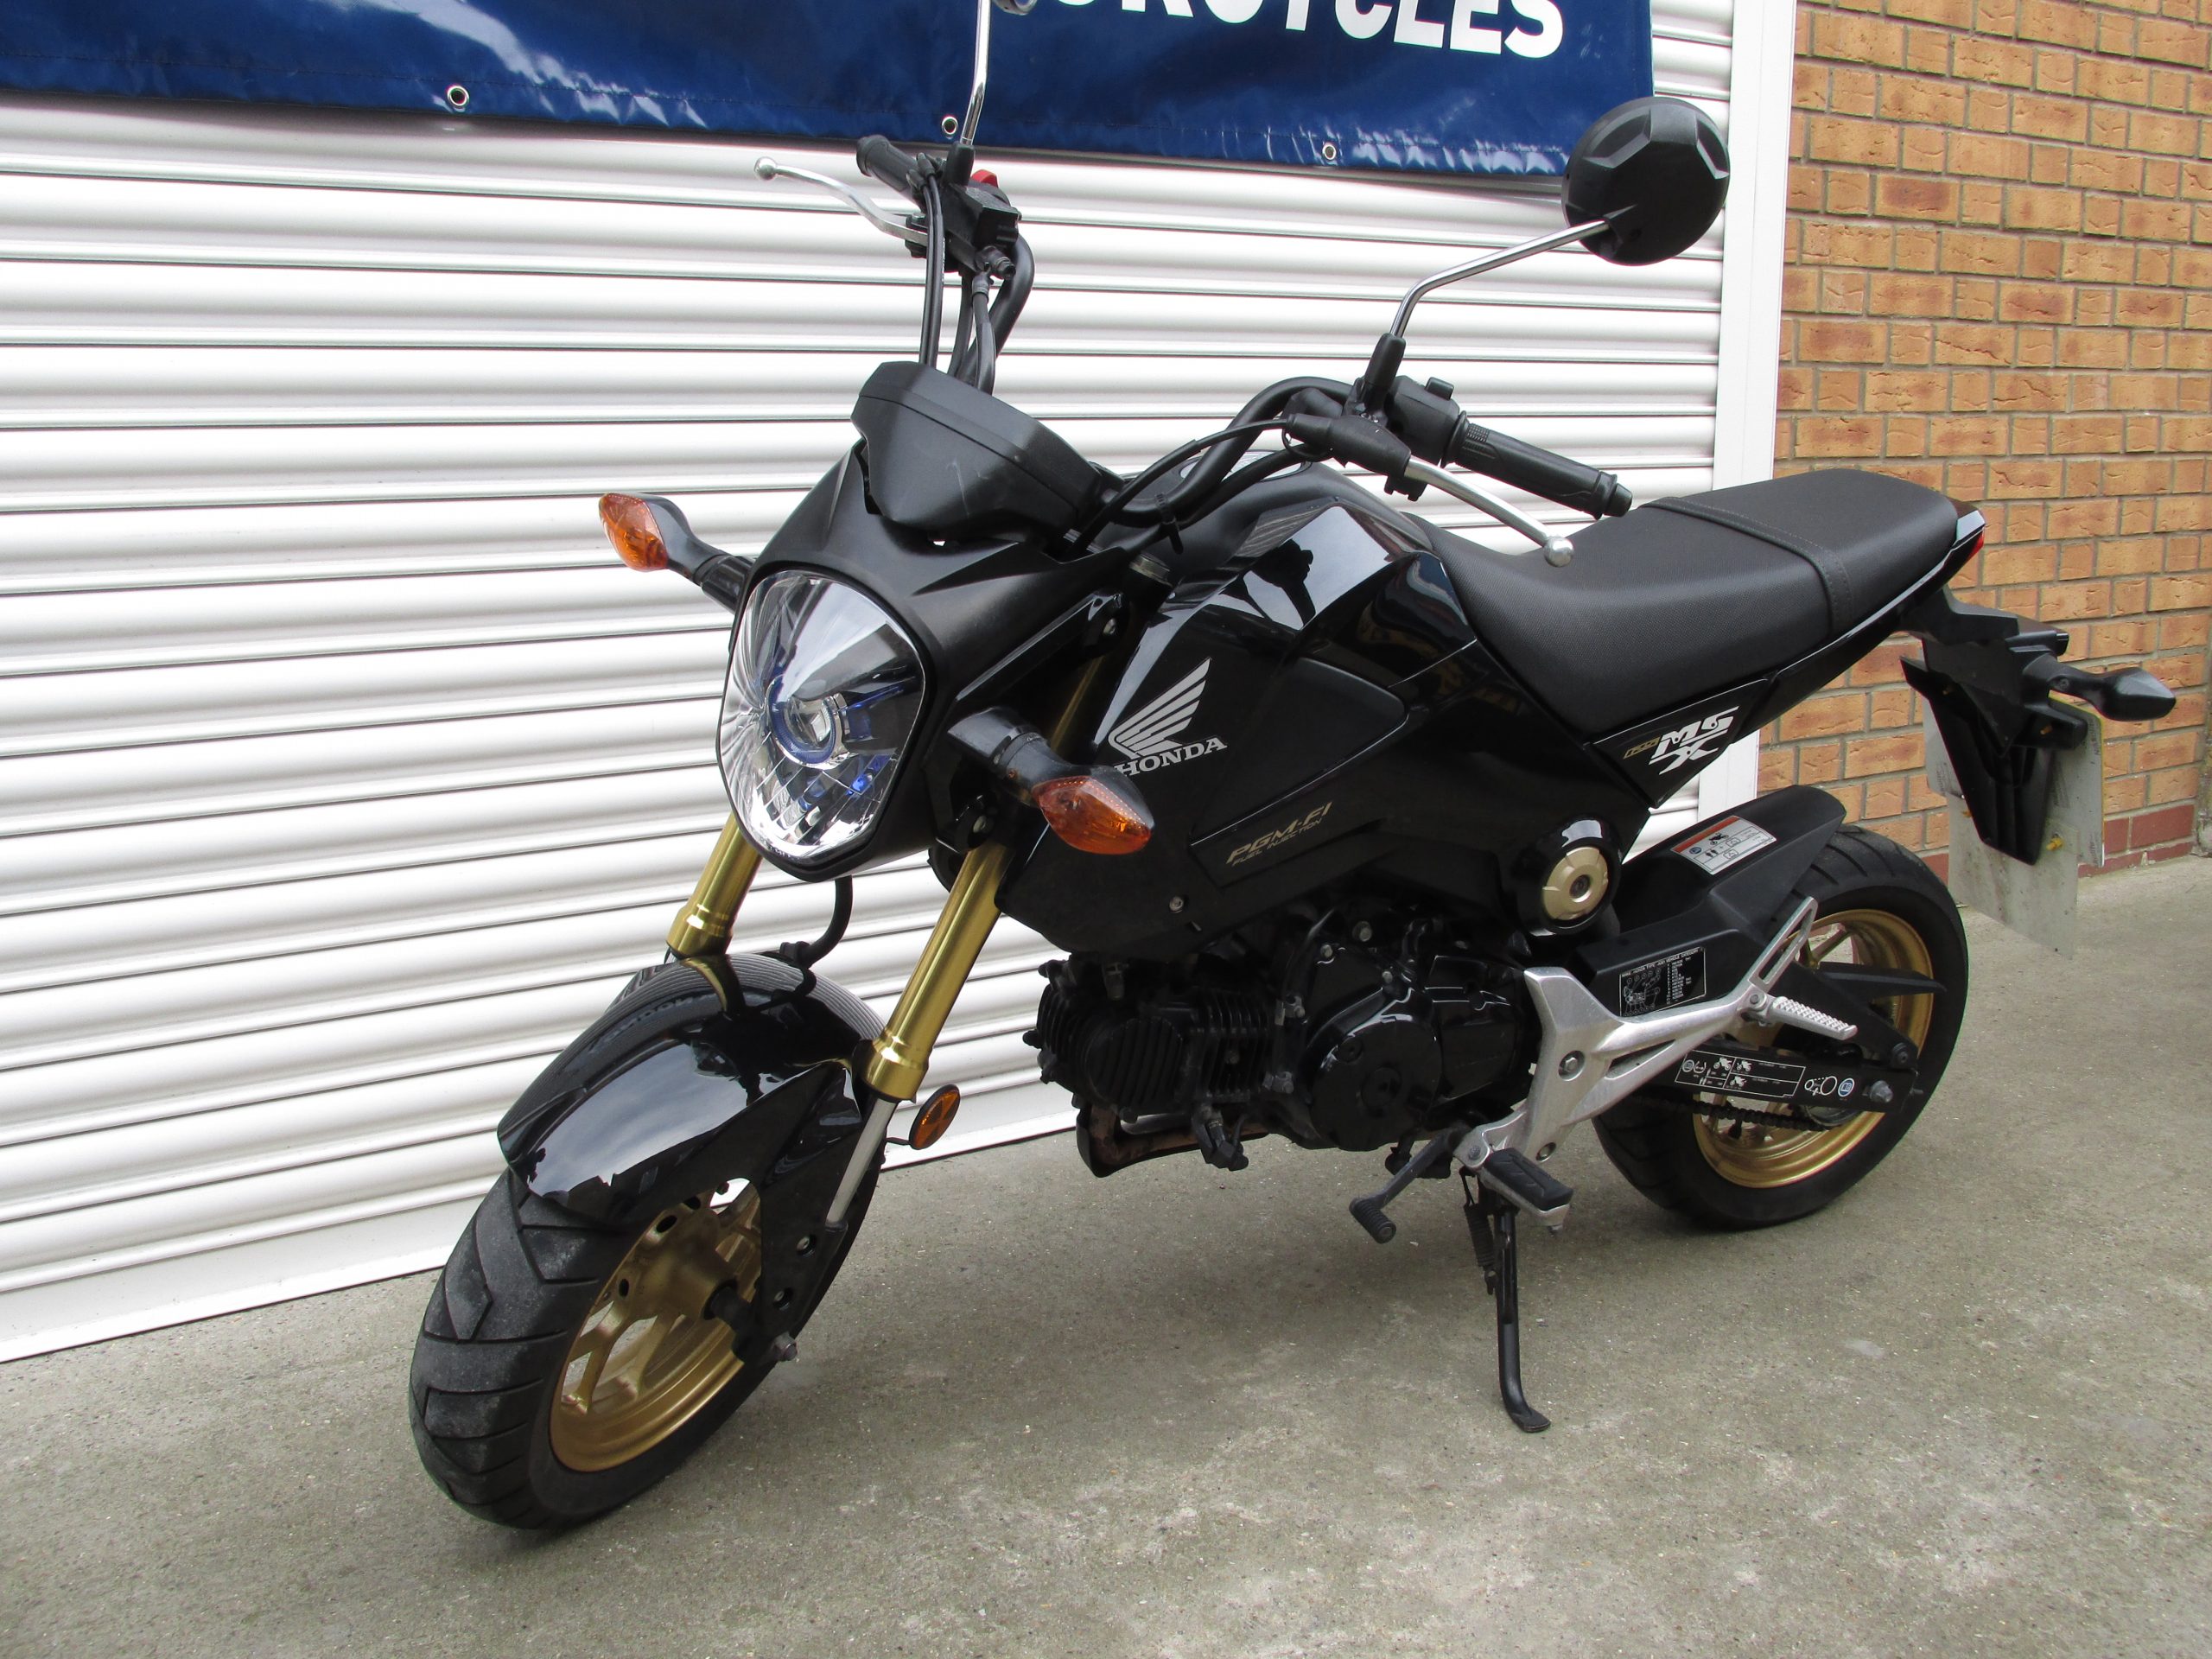 Honda MSX 125 for Sale in Hammermith | London Motorcycles